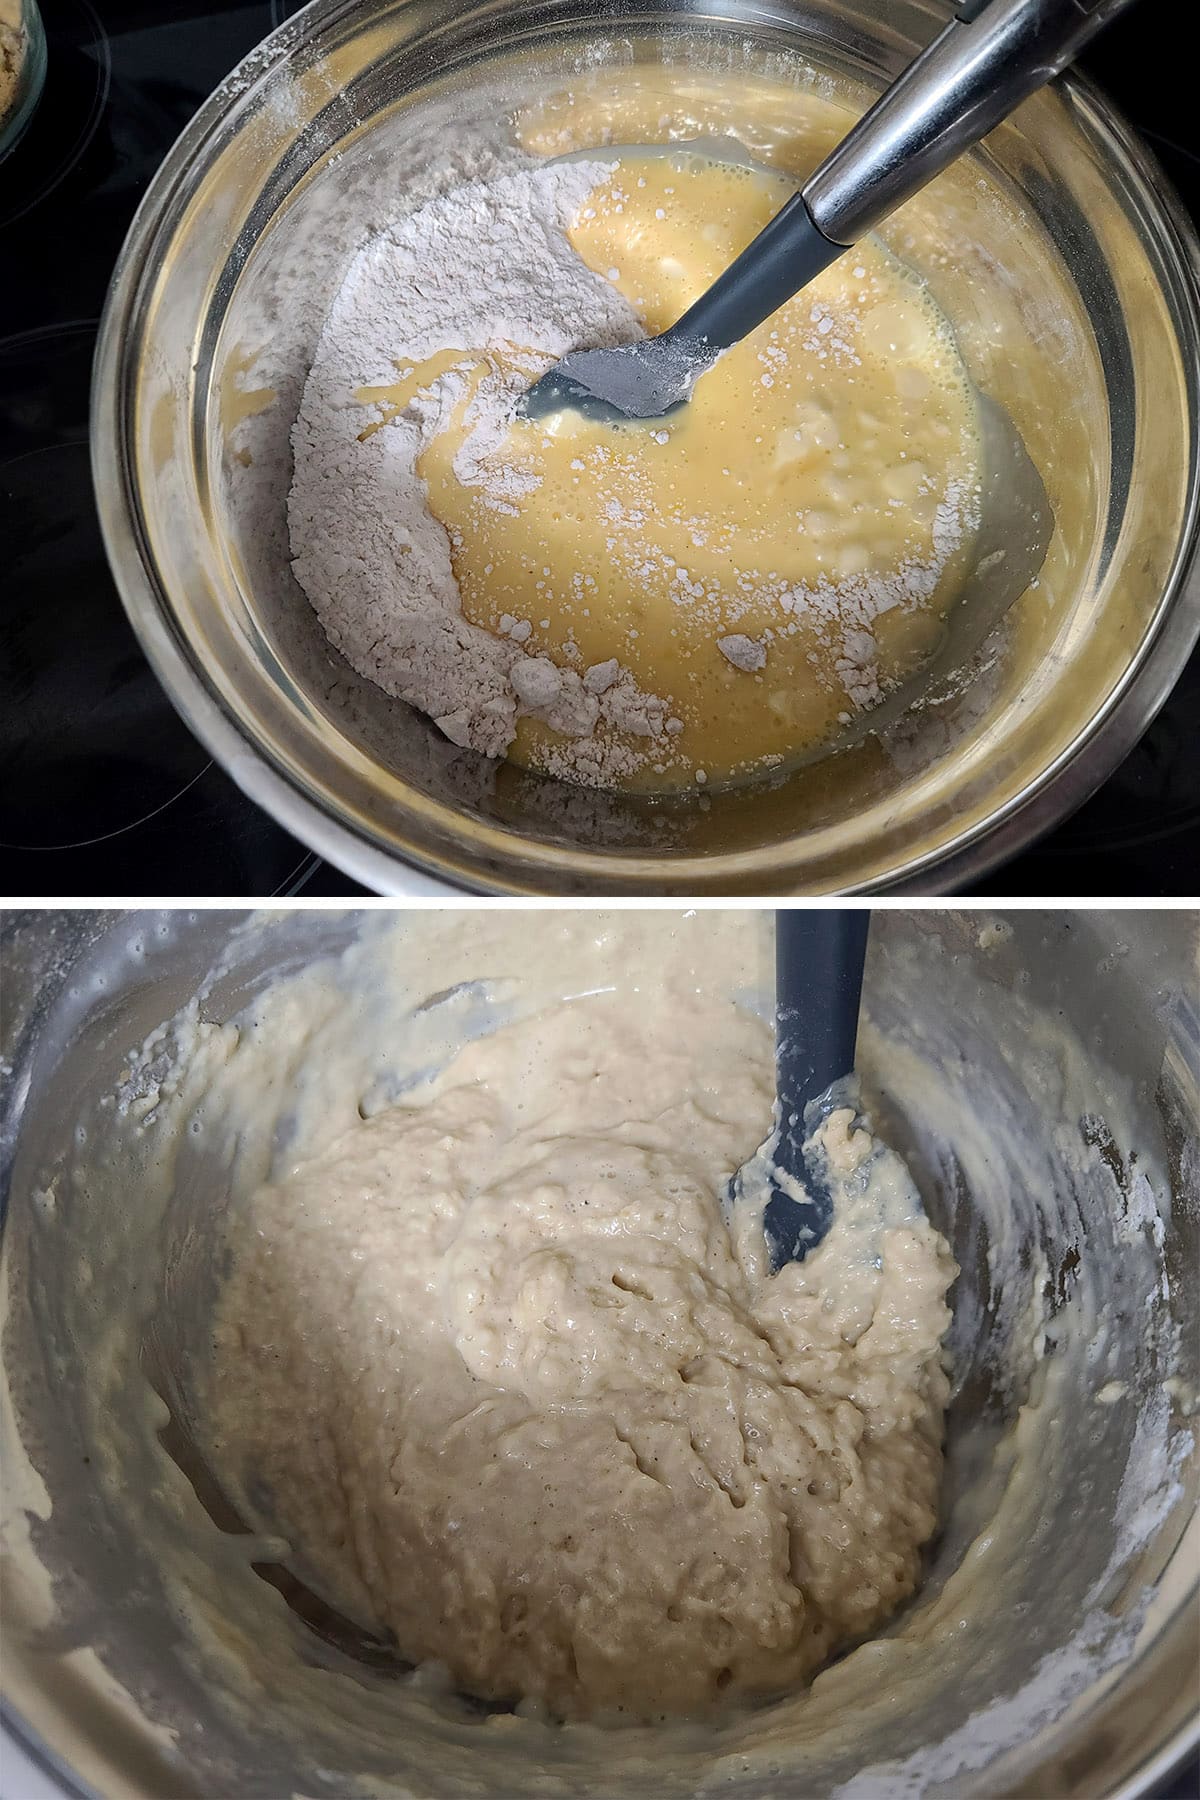 A 2 part image showing the muffin batter being mixed.